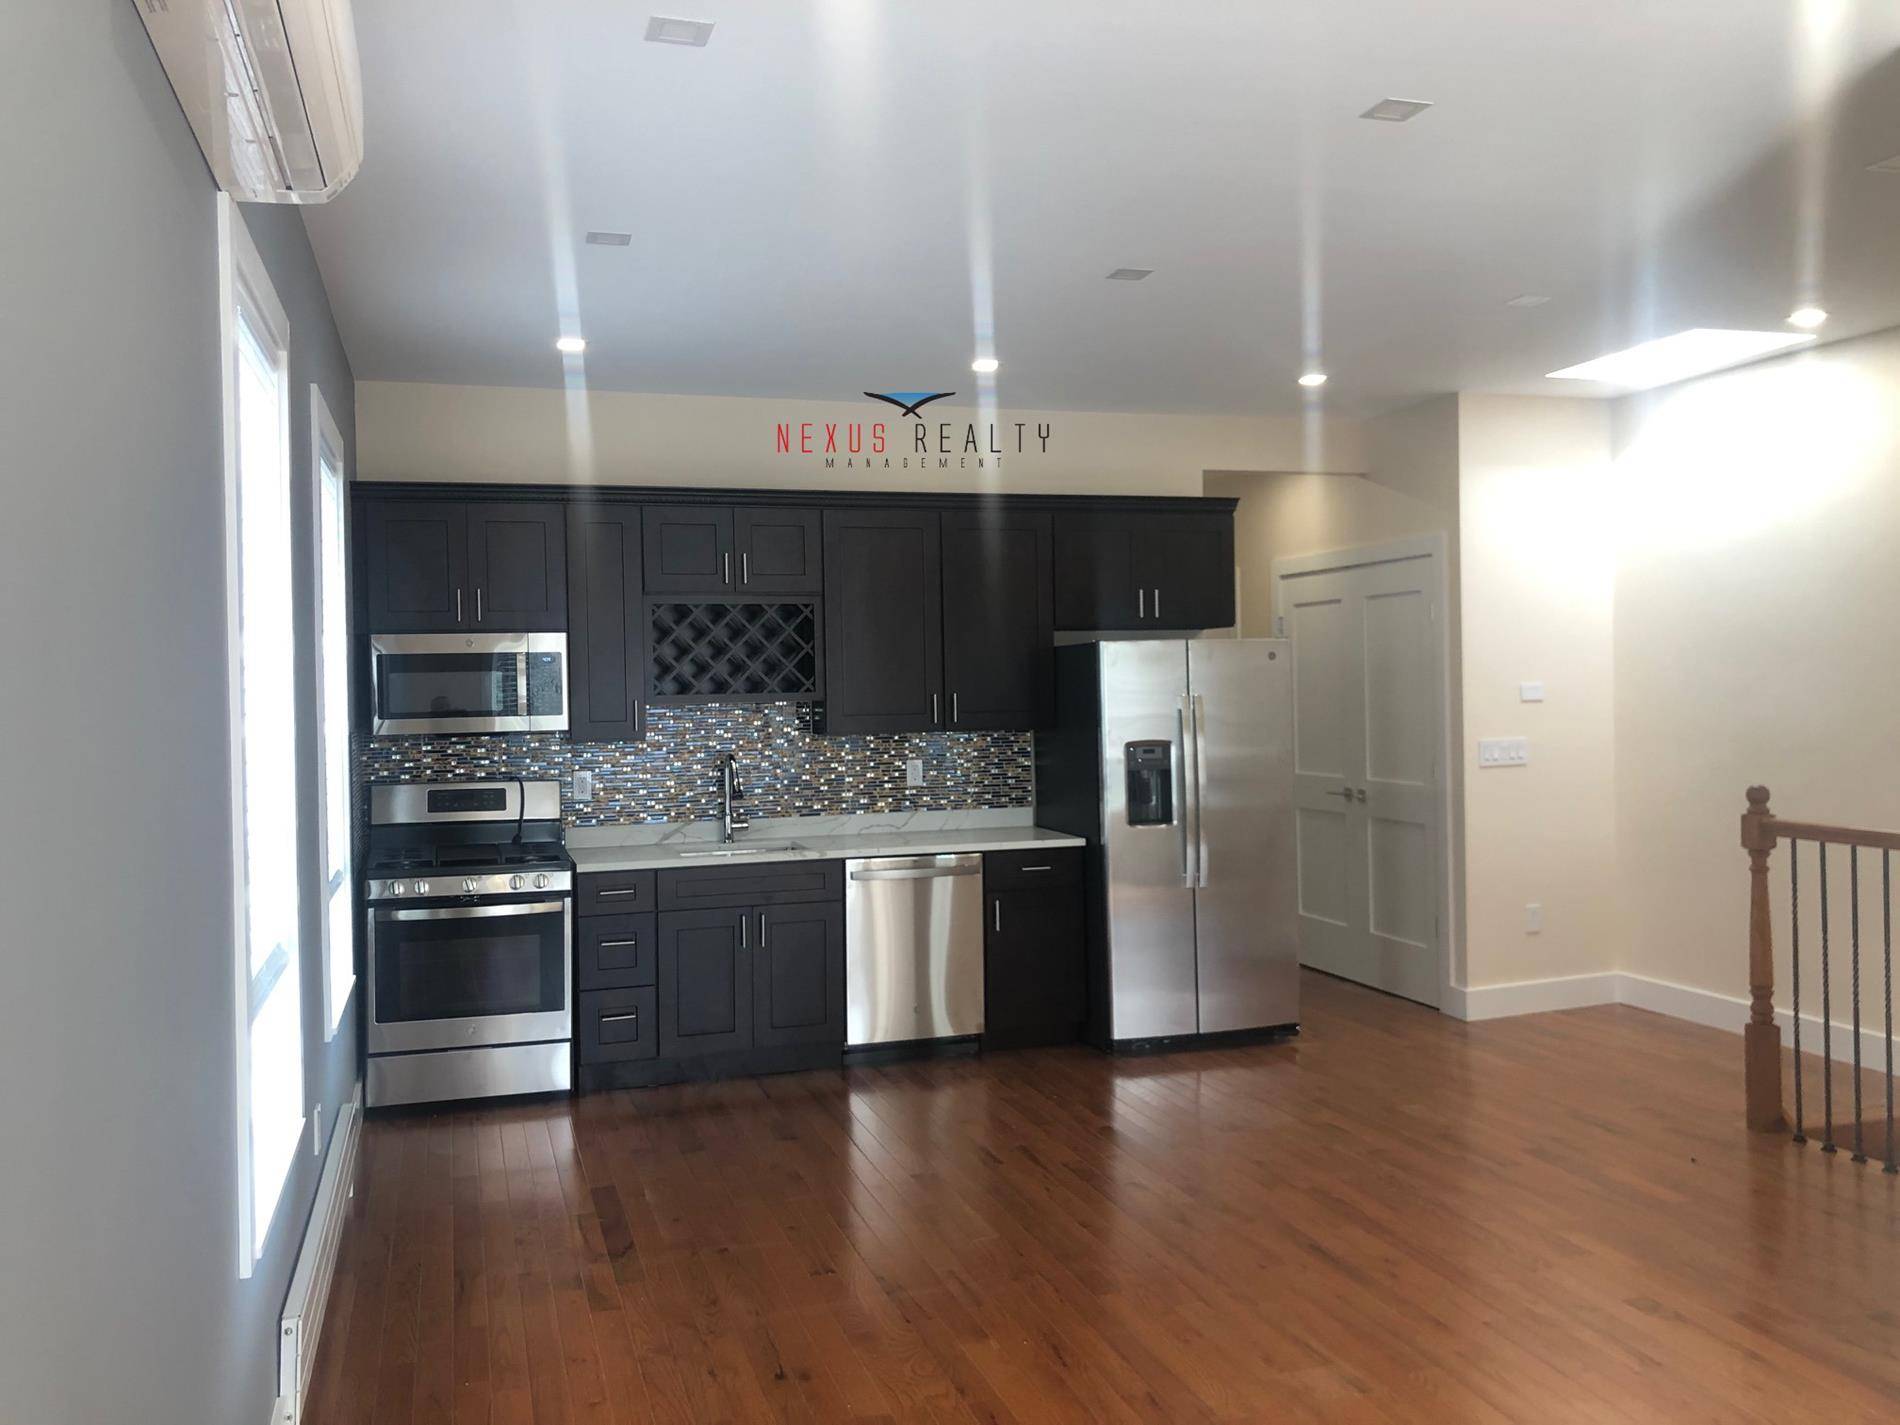 Spacious Brand New 3 Bedroom apartment steps from Astoria Park 3300 3 bedrooms apartment on the 2nd floor of a 2 family house next to Astoria parkBeautiful island kitchen with ...